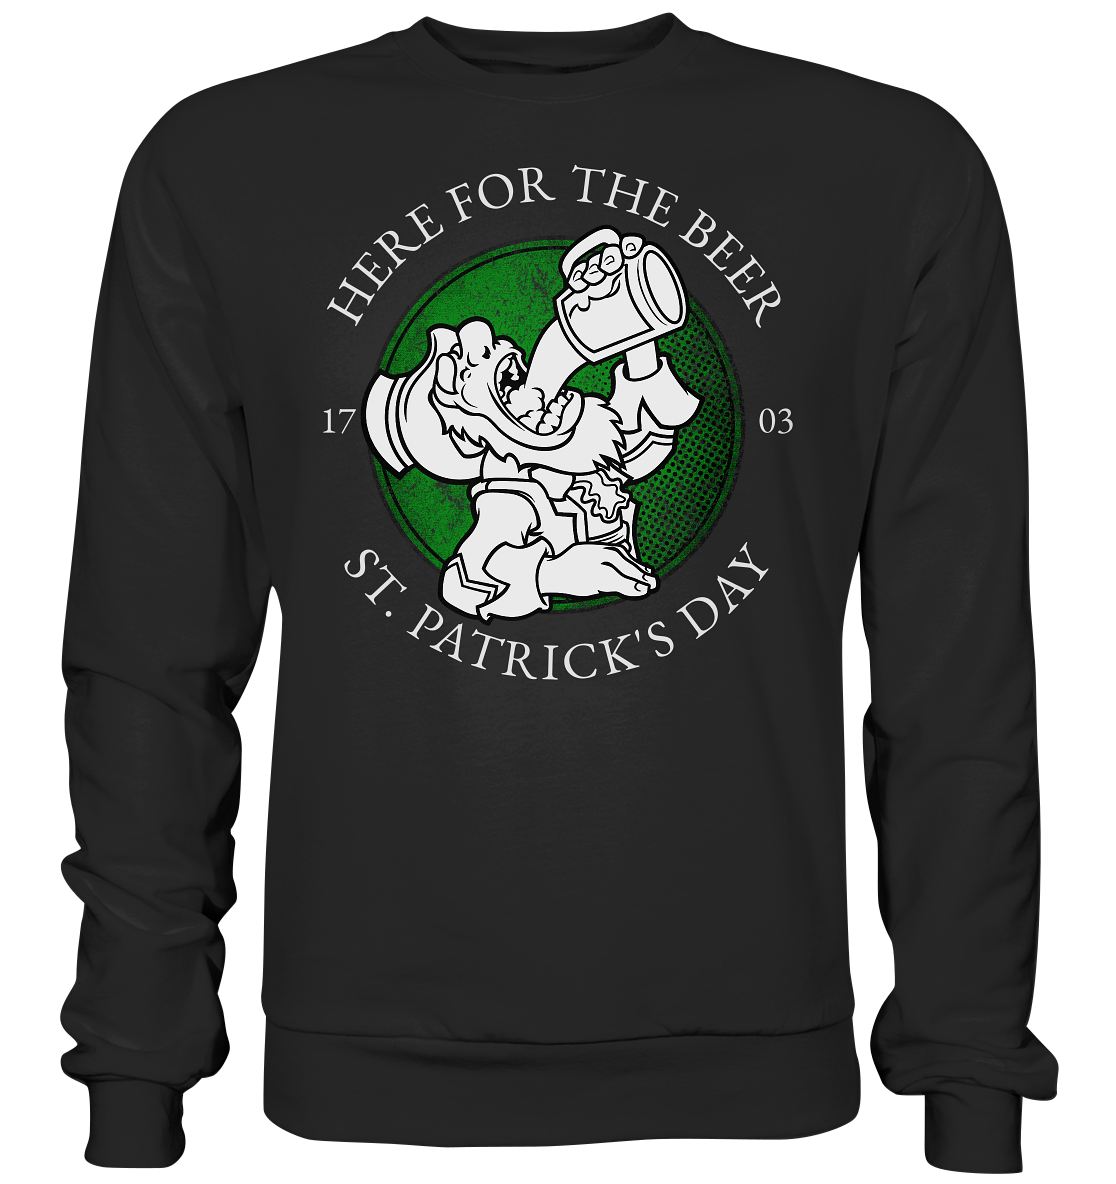 Here For The Beer "St. Patrick's Day" - Premium Sweatshirt